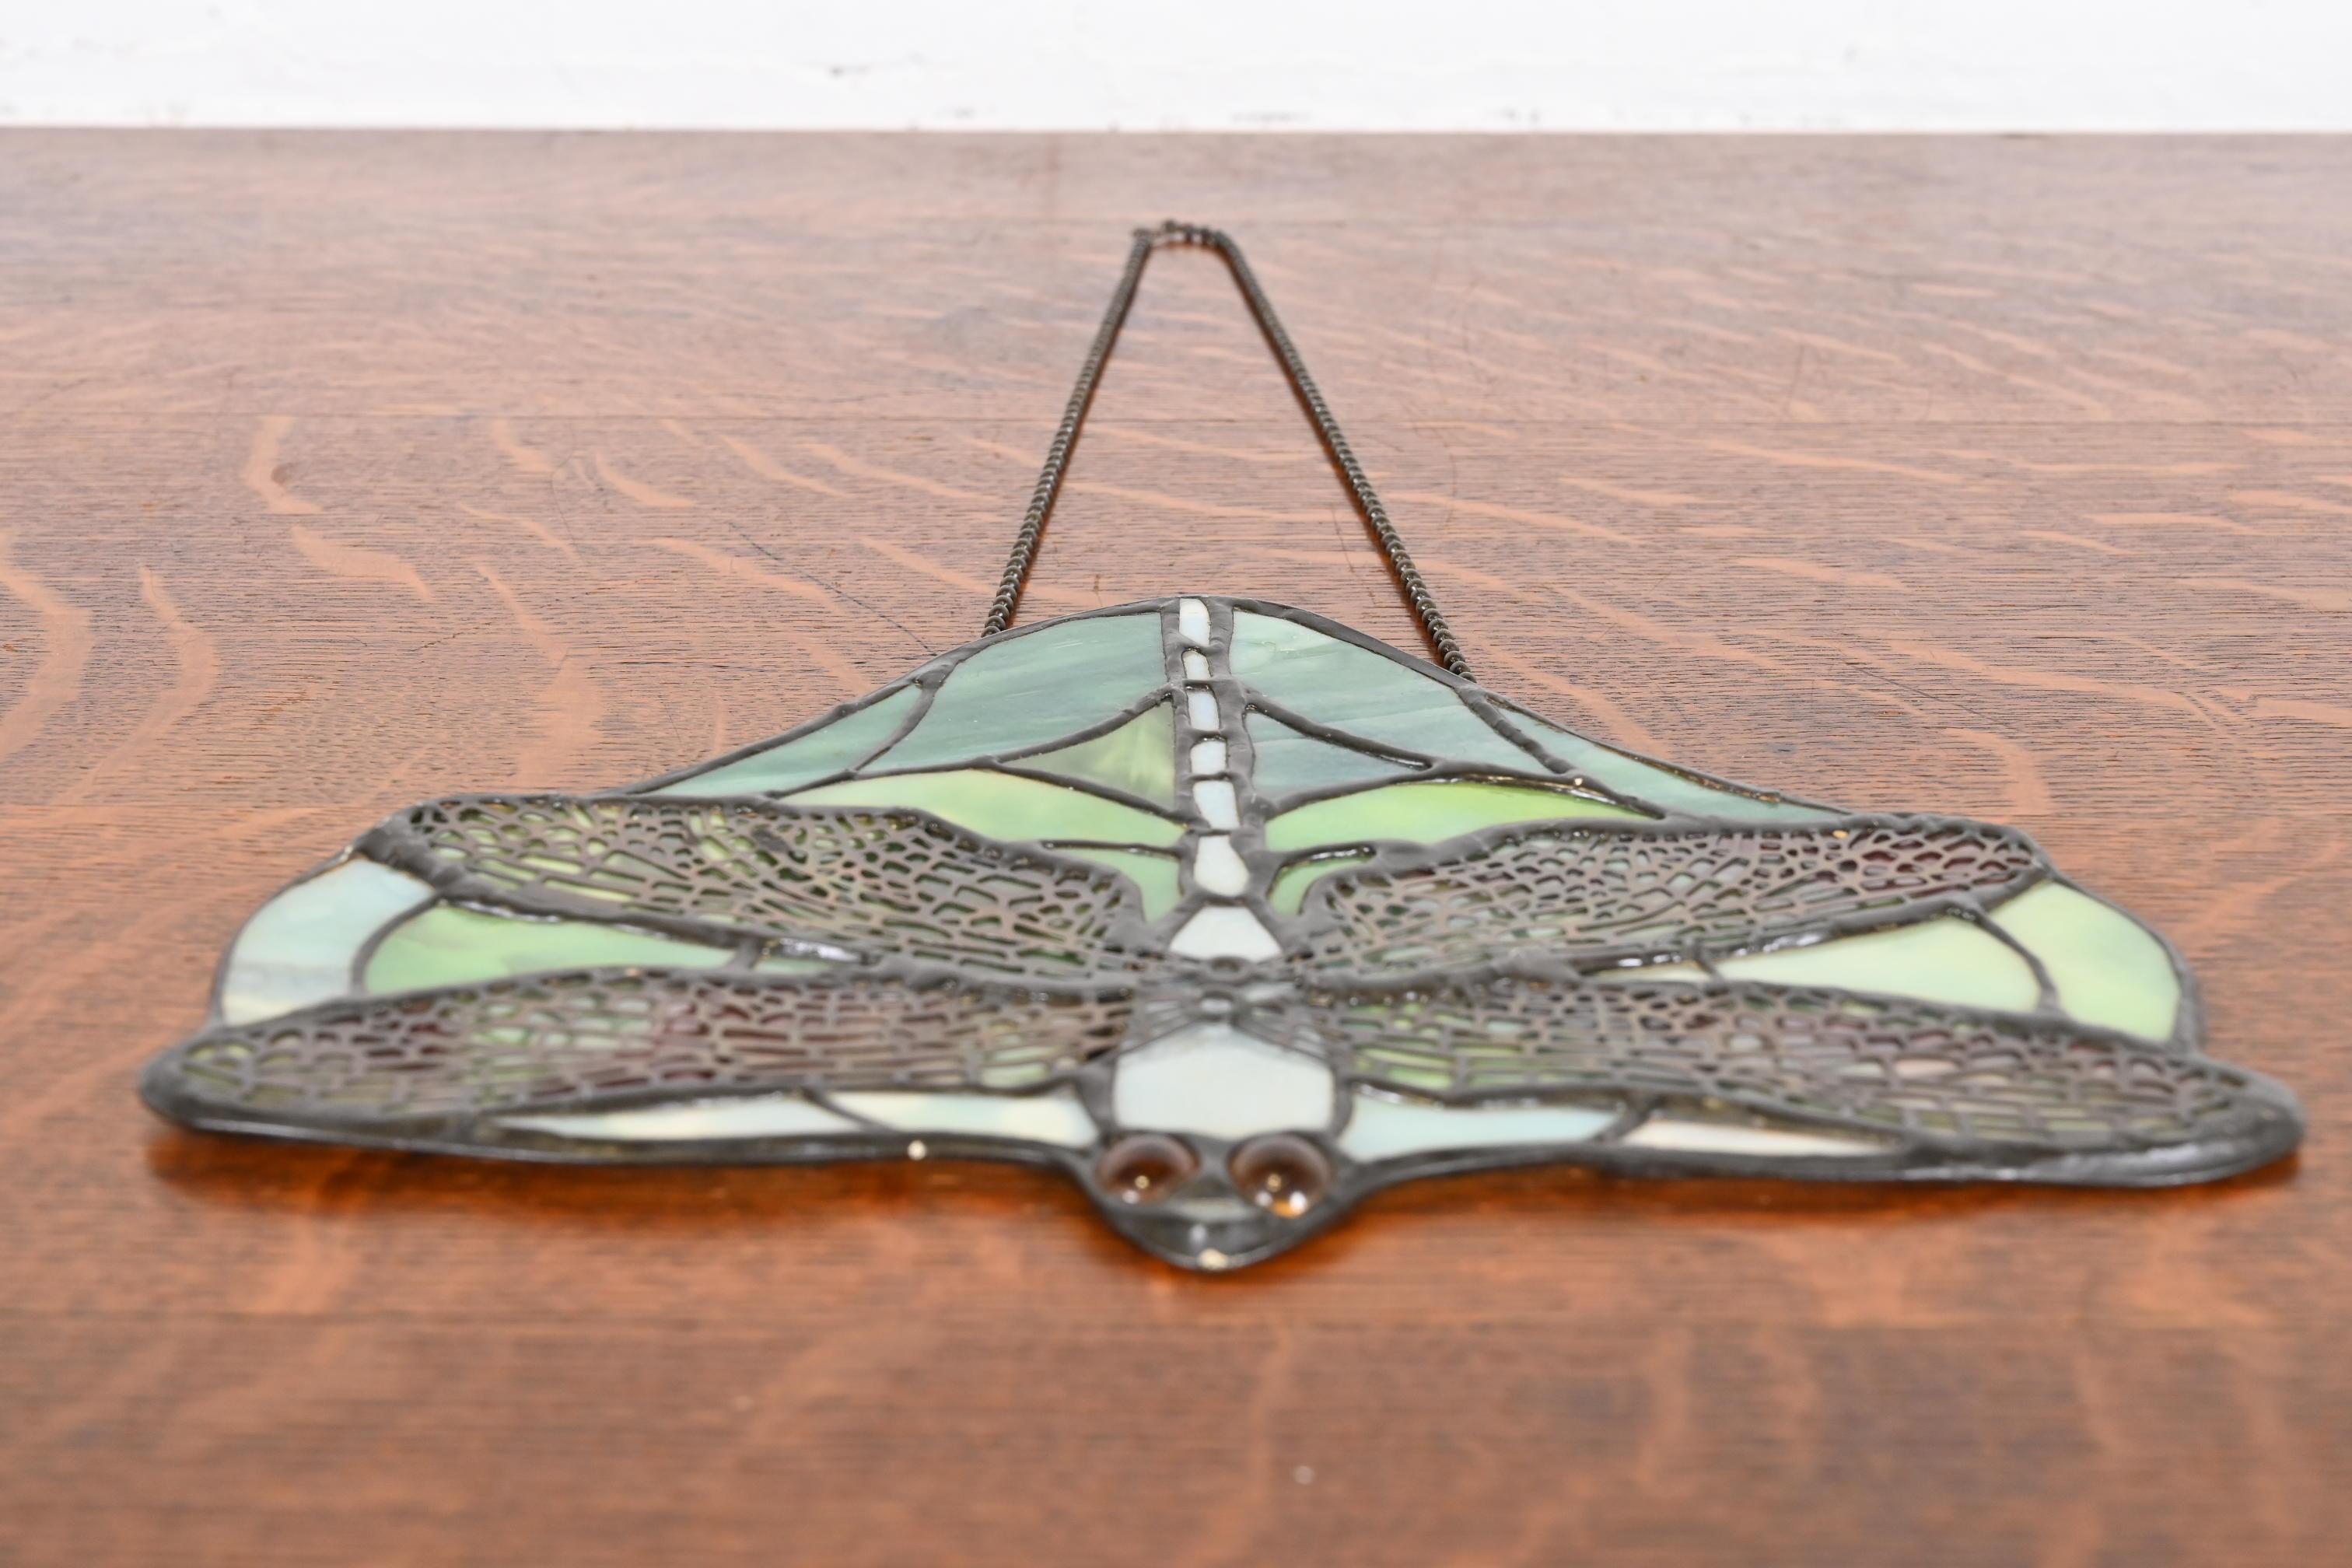 20th Century Arts & Crafts Dragonfly Stained Glass Lamp Screen Pendant After Tiffany Studios